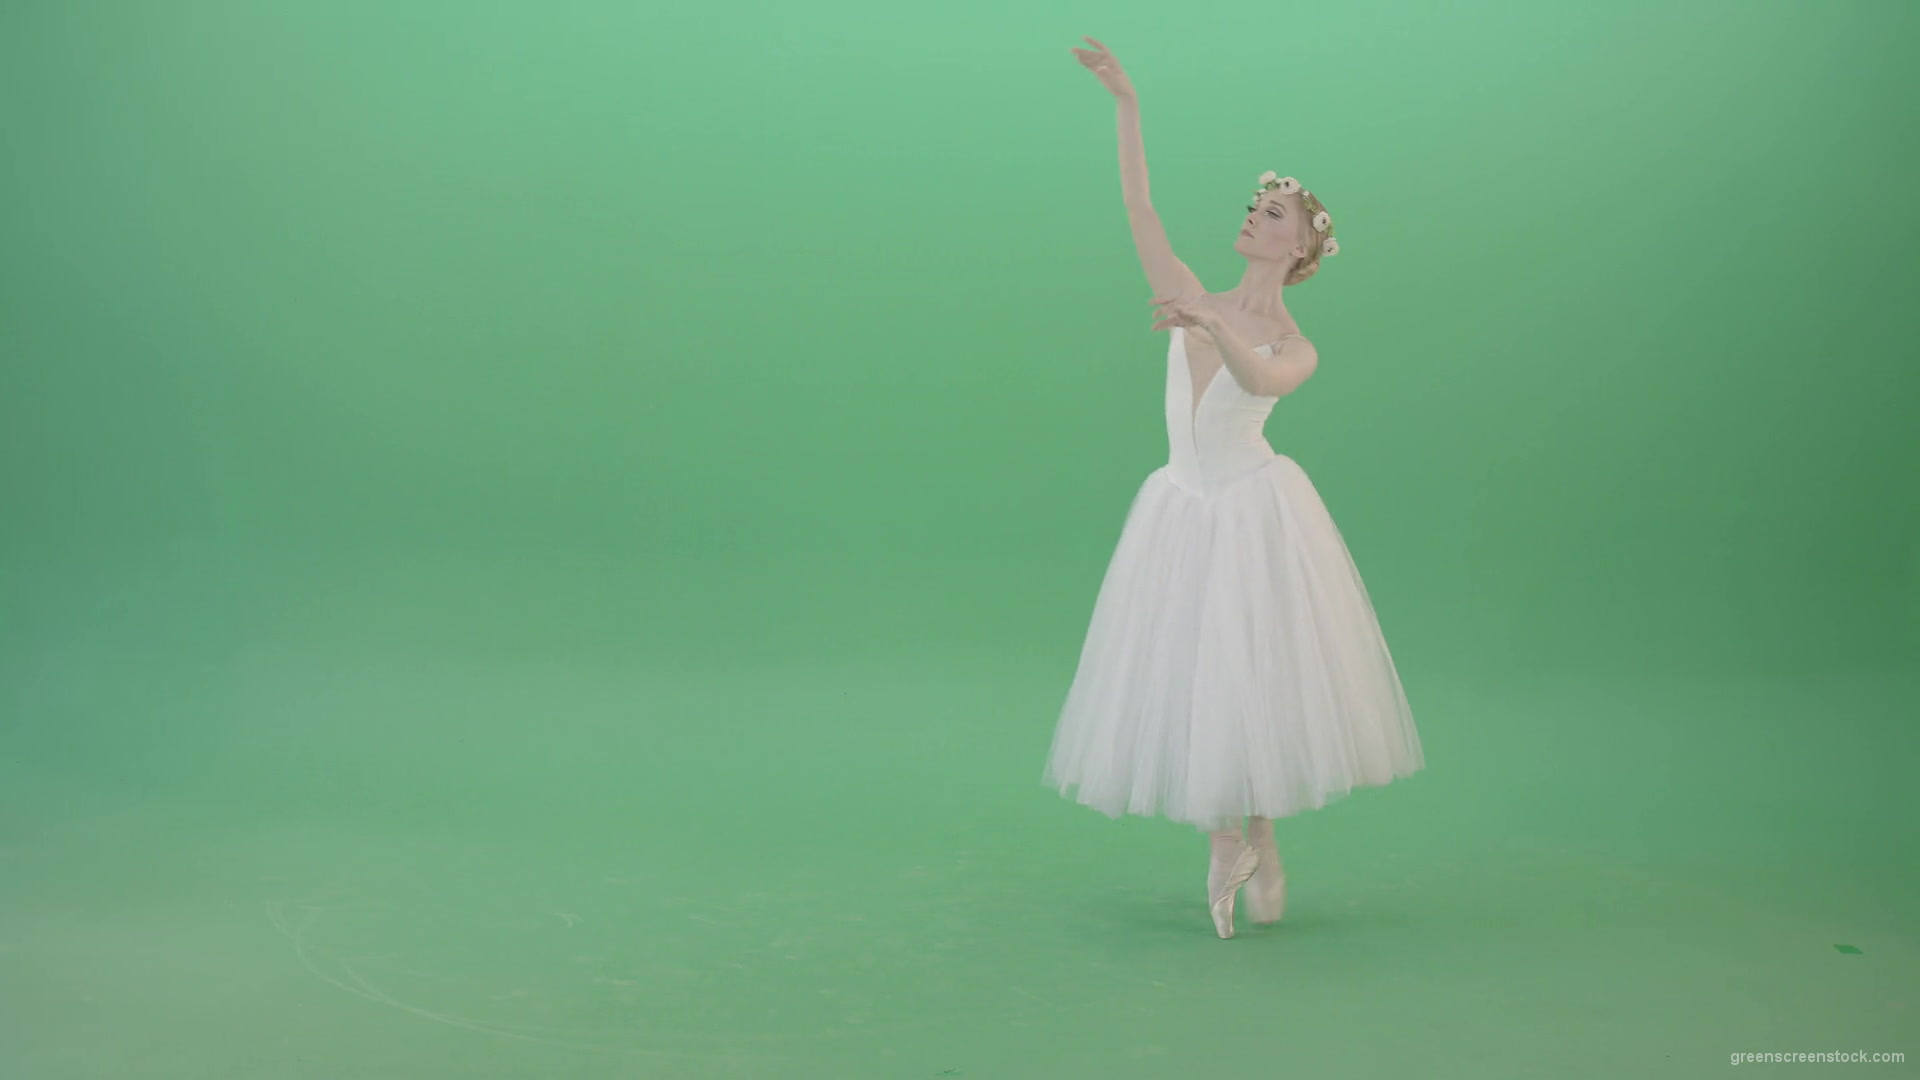 Blonde-Girl-in-elegant-white-wedding-dress-mowing-away-and-dancing-ballet-art-isolated-on-green-screen-4K-Video-Footage-1920_004 Green Screen Stock